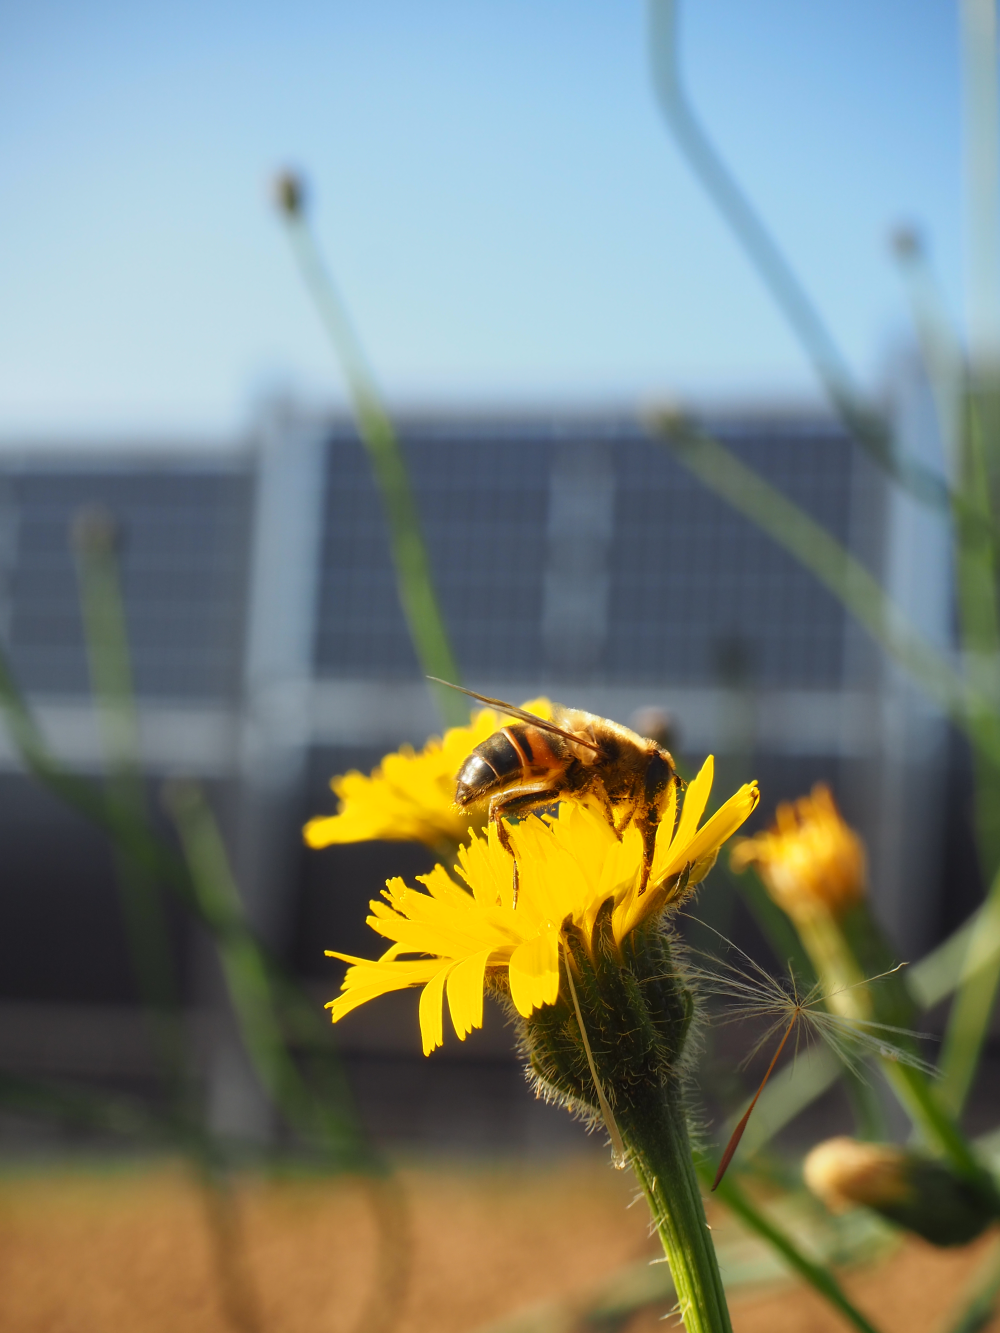 Hoverfly in front of vertical agrivoltaics plant in Wellingen (Merzig).